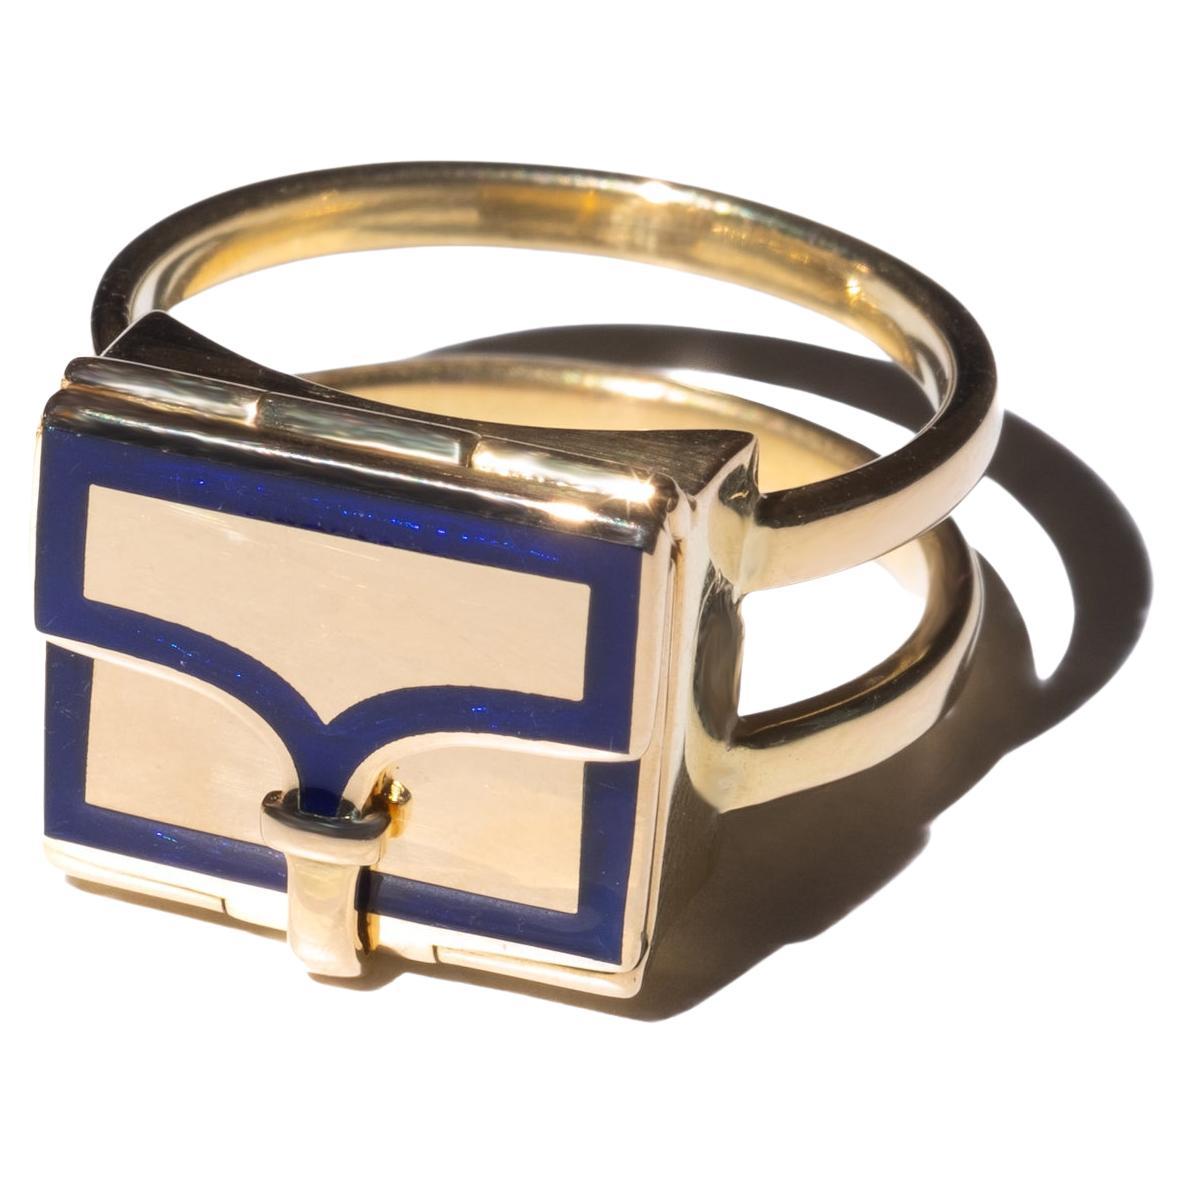 The Fleur Fairfax Book Ring in 18ct Gold and Enamel - Sapphire Blue US 7 For Sale